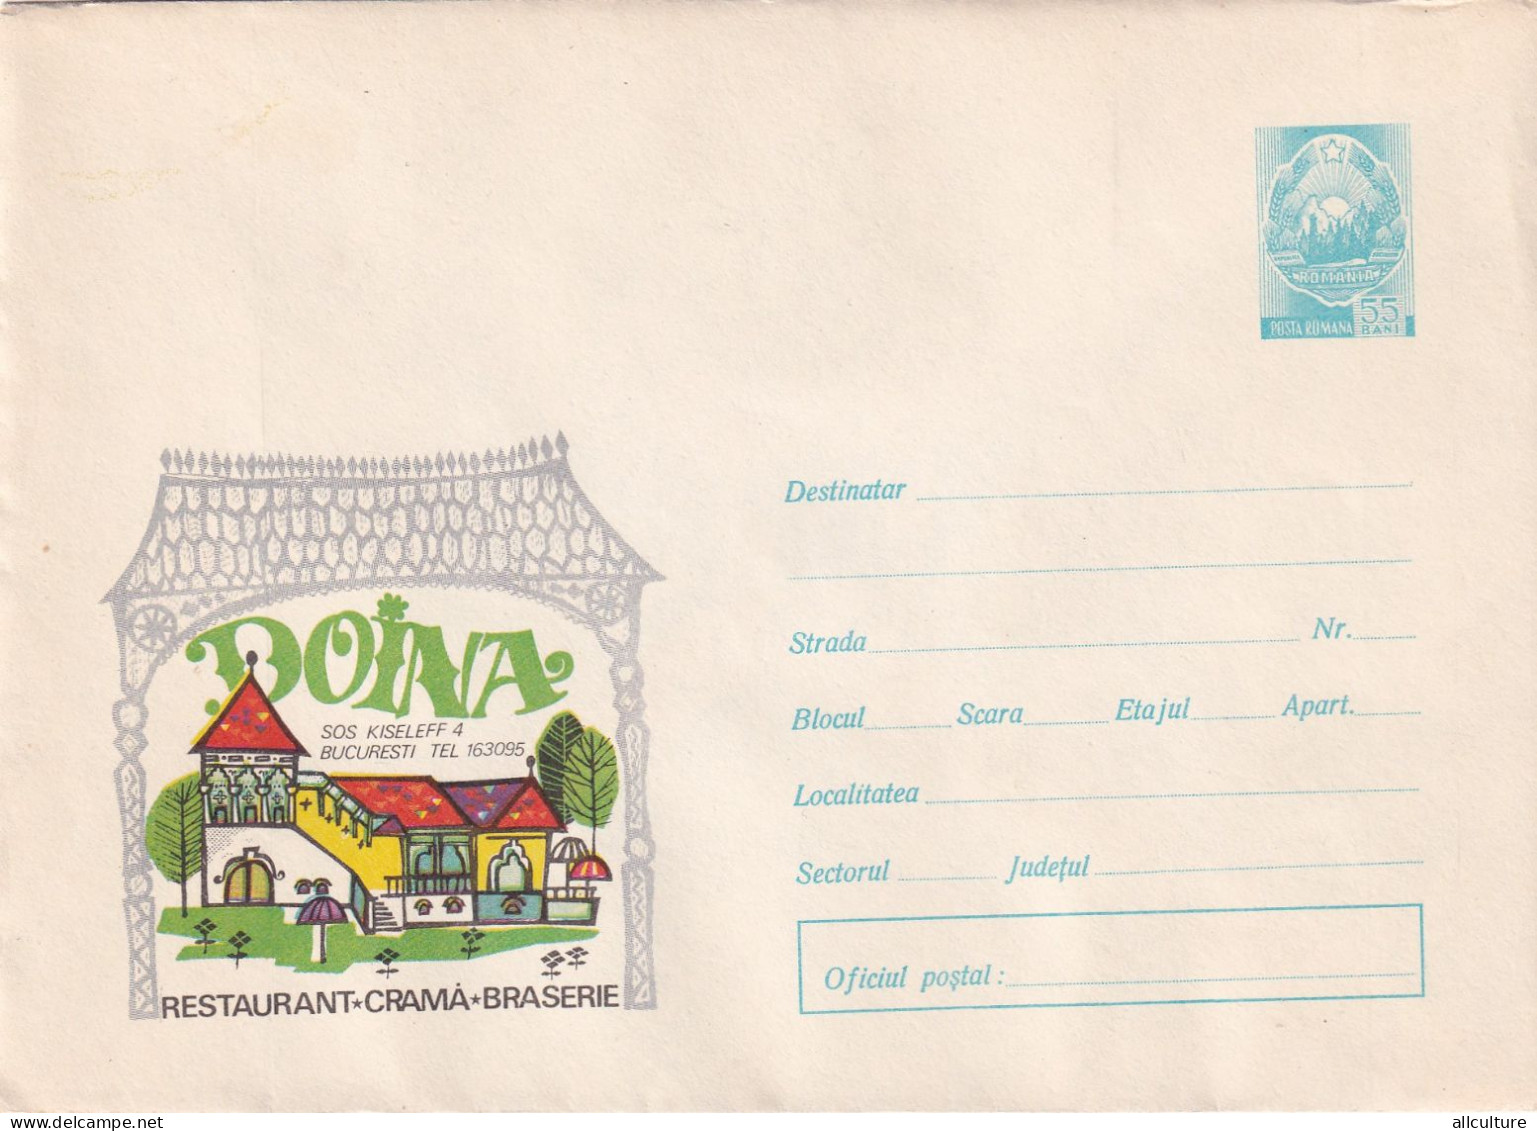 A24514 - RESTAURANT "DOINA" BEER,ALCOHOL  1970  COVER STATIONERY  Romania UNUSED - Ganzsachen